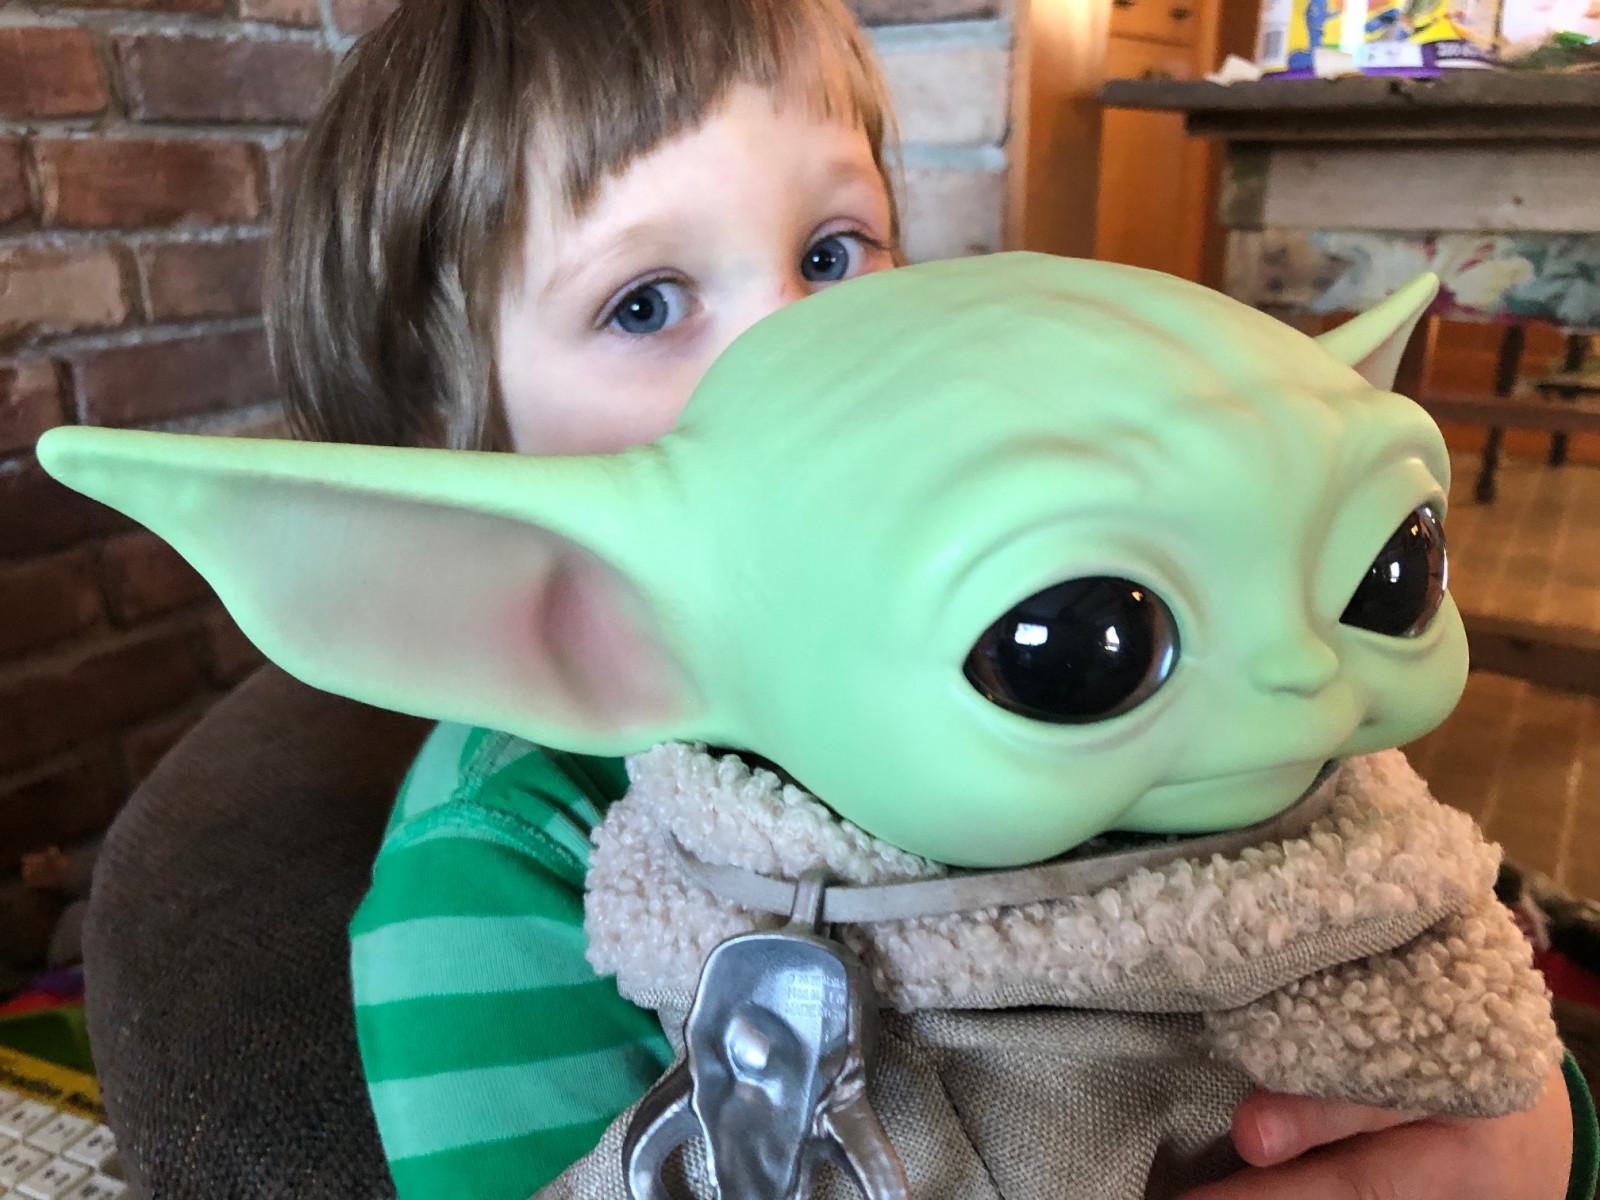 A child holding a doll of Baby Yoda